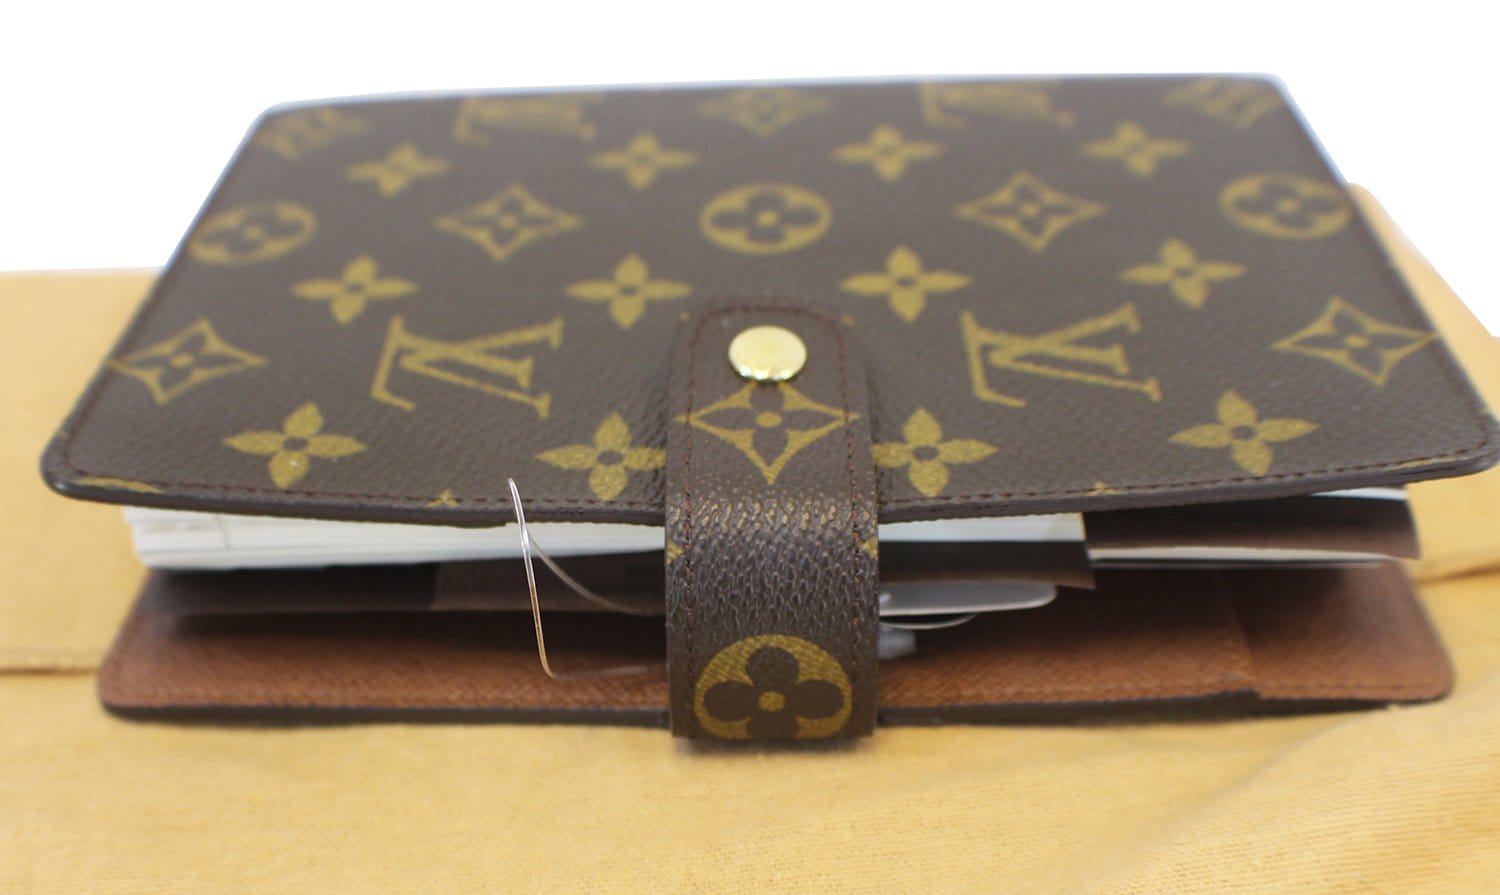 Louis Vuitton Large Ring Agenda Cover GM in Monogram with 2023 Weekly  Agenda Refill - SOLD